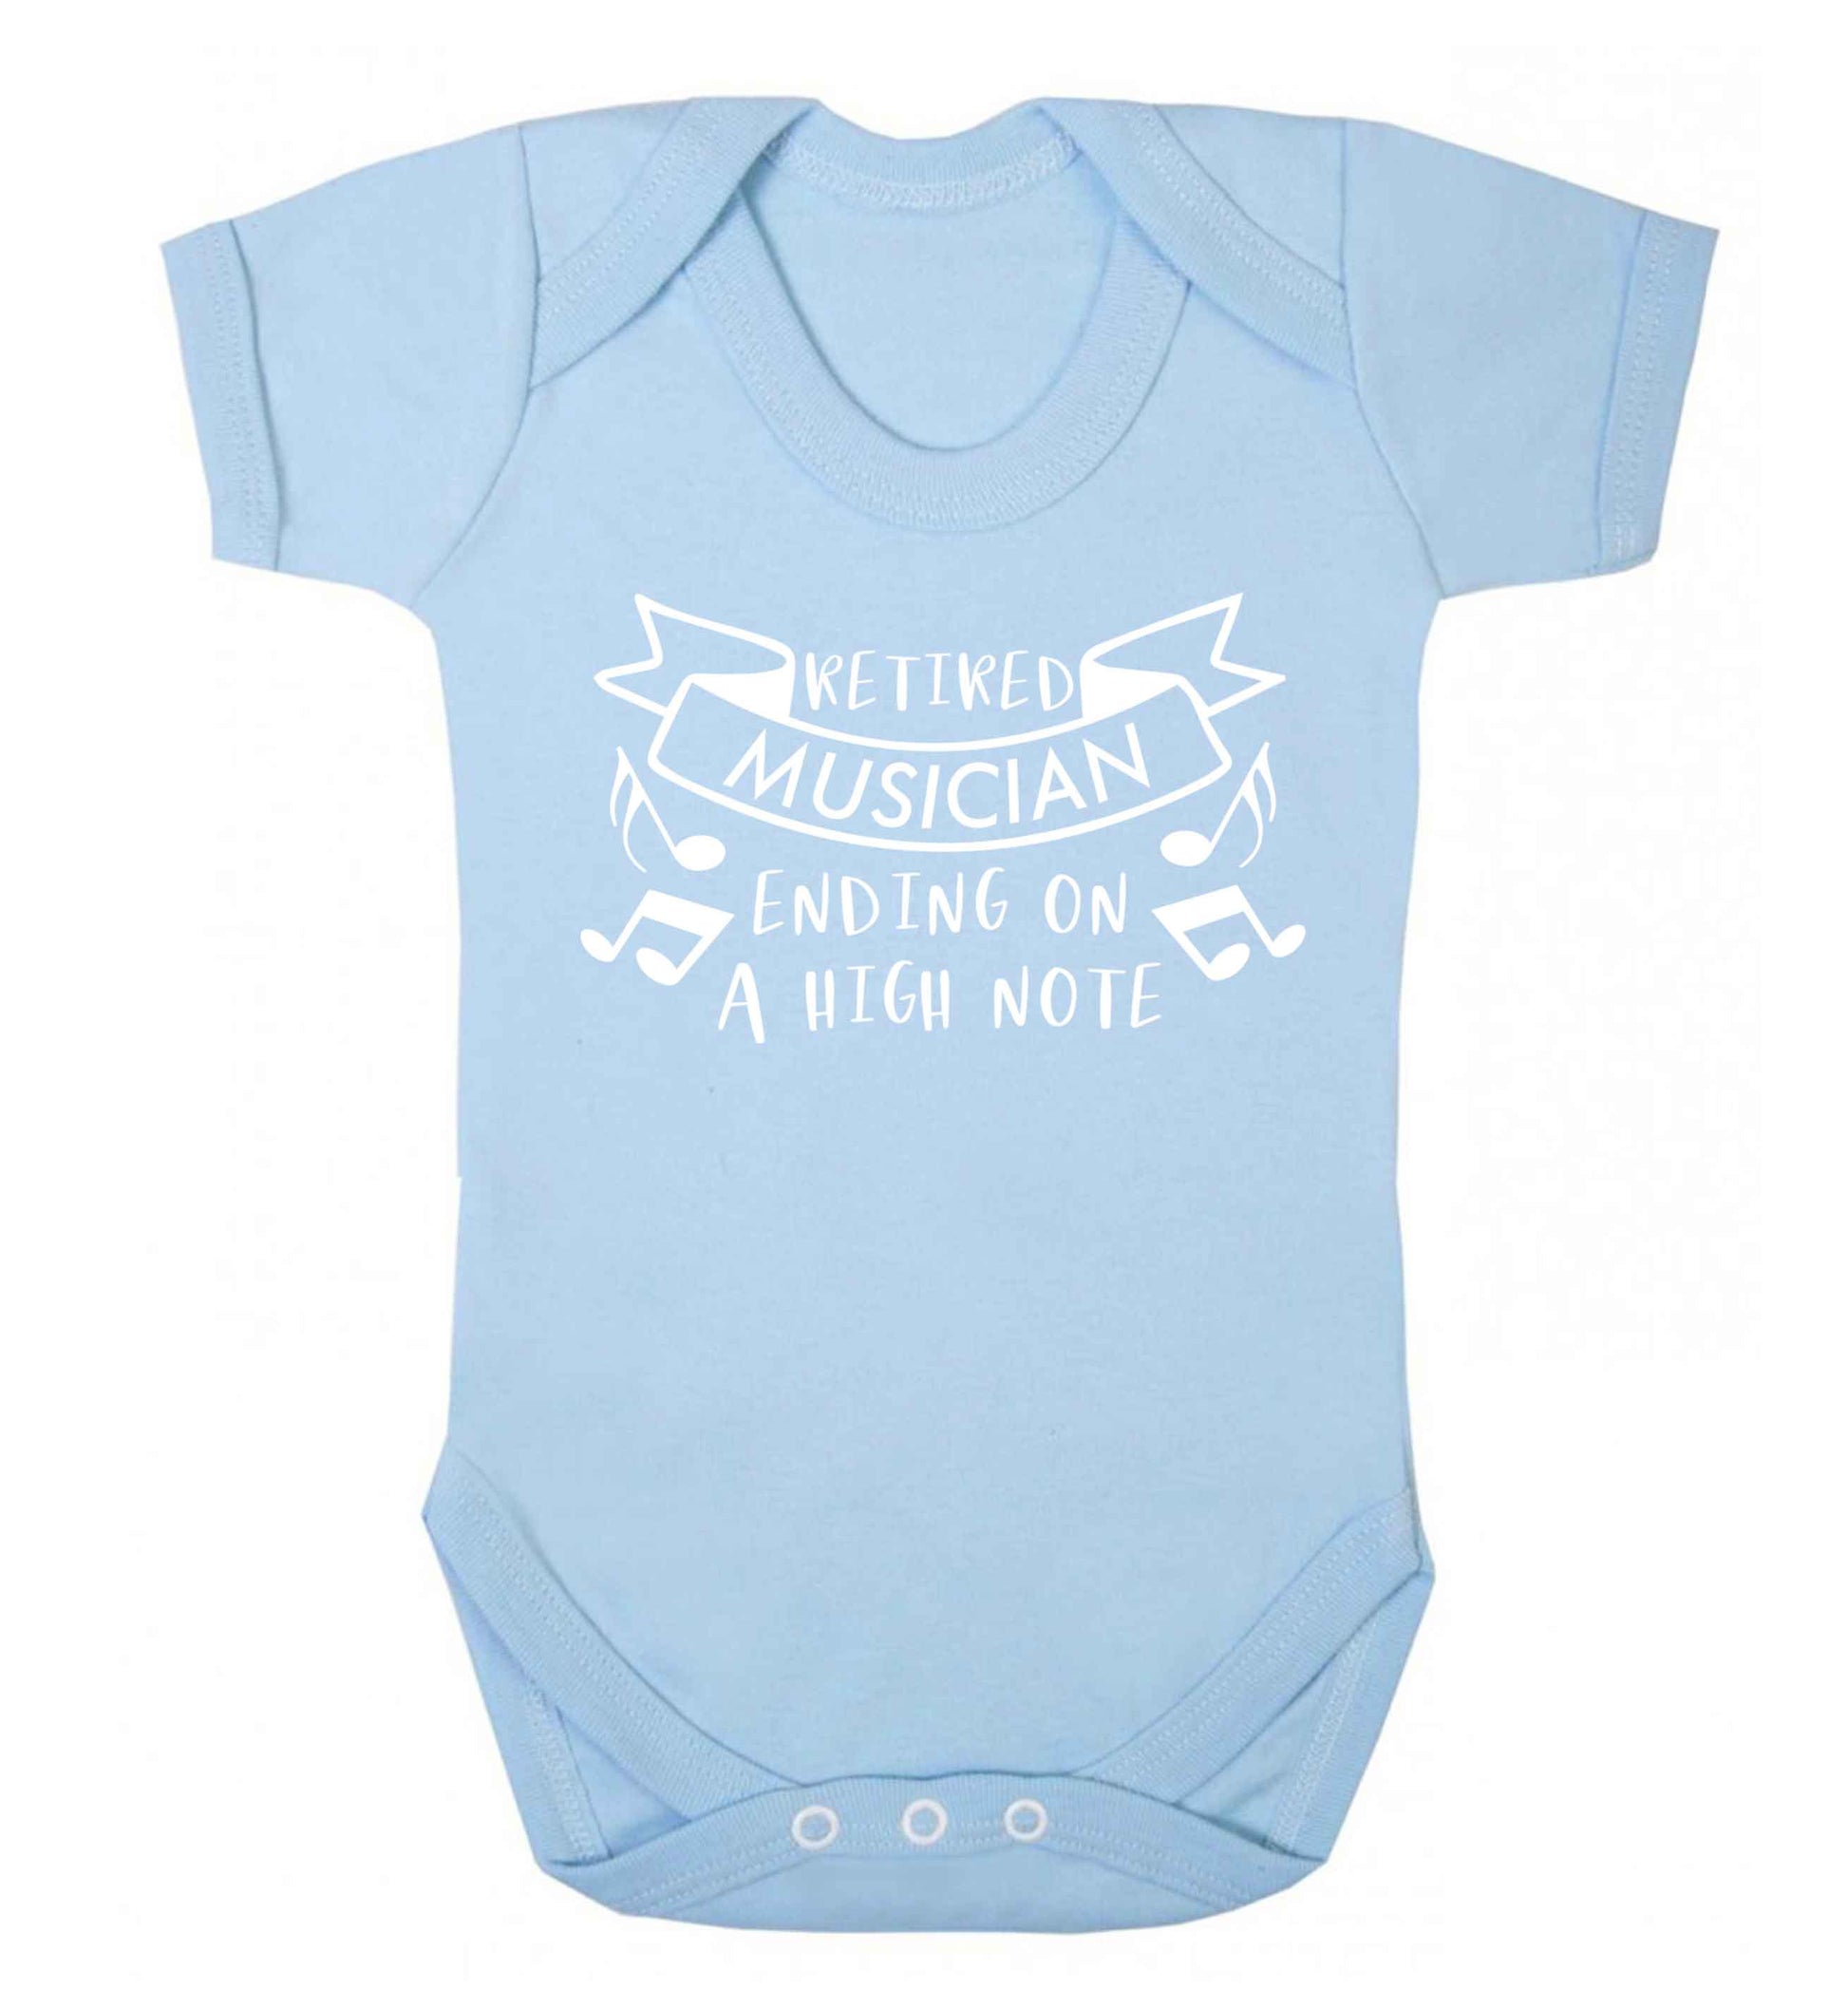 Retired musician ending on a high note Baby Vest pale blue 18-24 months